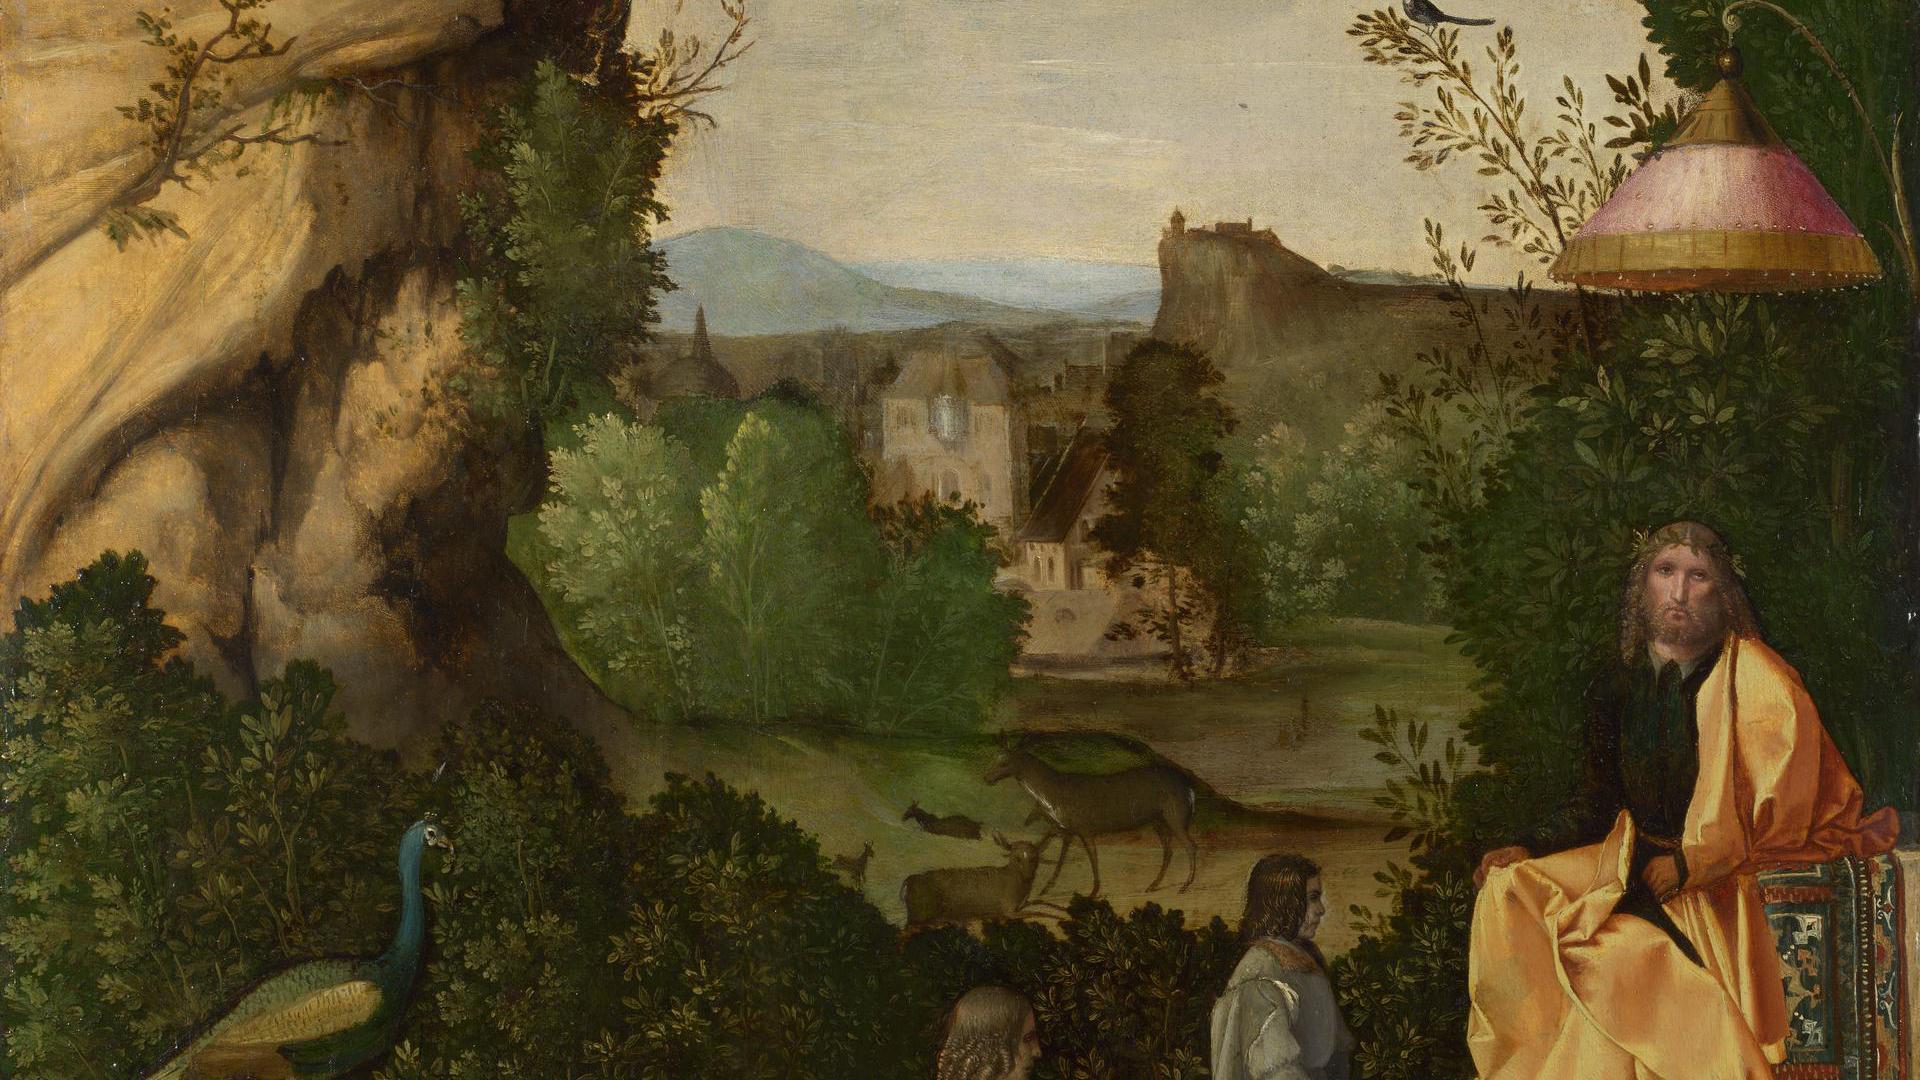 Homage to a Poet by Follower of Giorgione